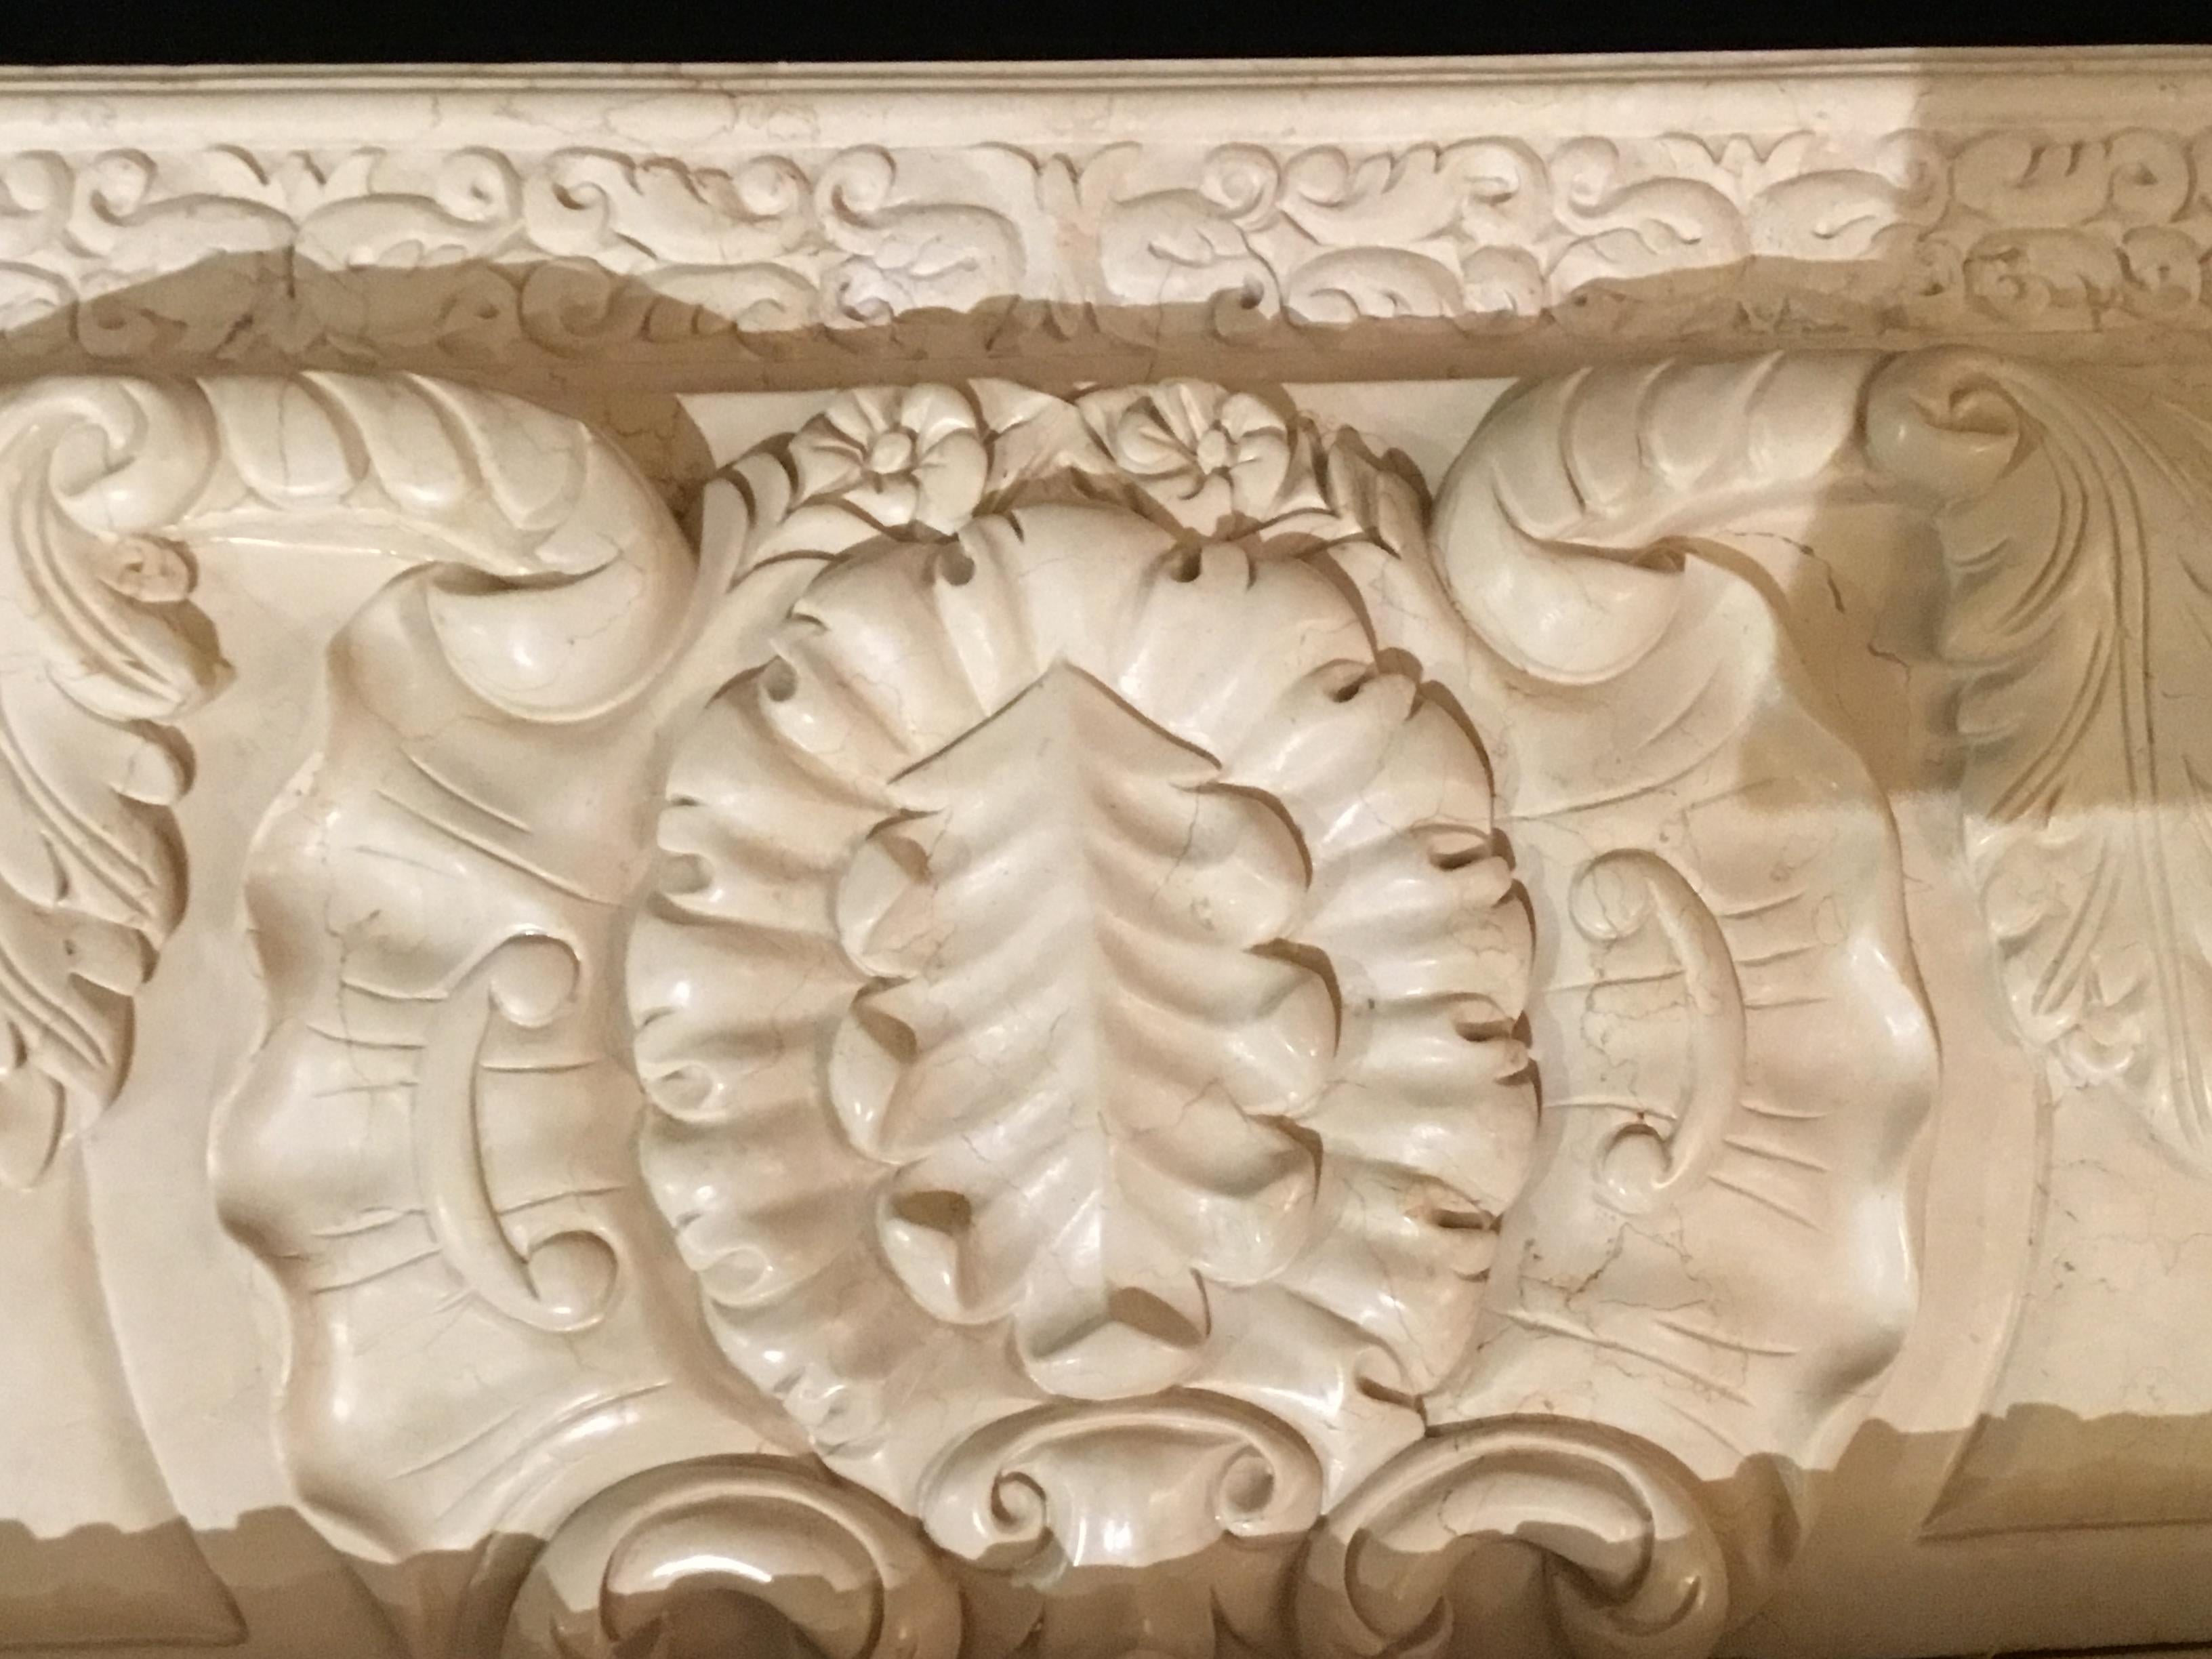 Large cream color marble mantel that is hand carved with floral and foliate designs. Petite flowers
Are carved in a horizontal line beneath the top piece and a vertical line down each side. A central
Leaf cartouche is centered at the top portion